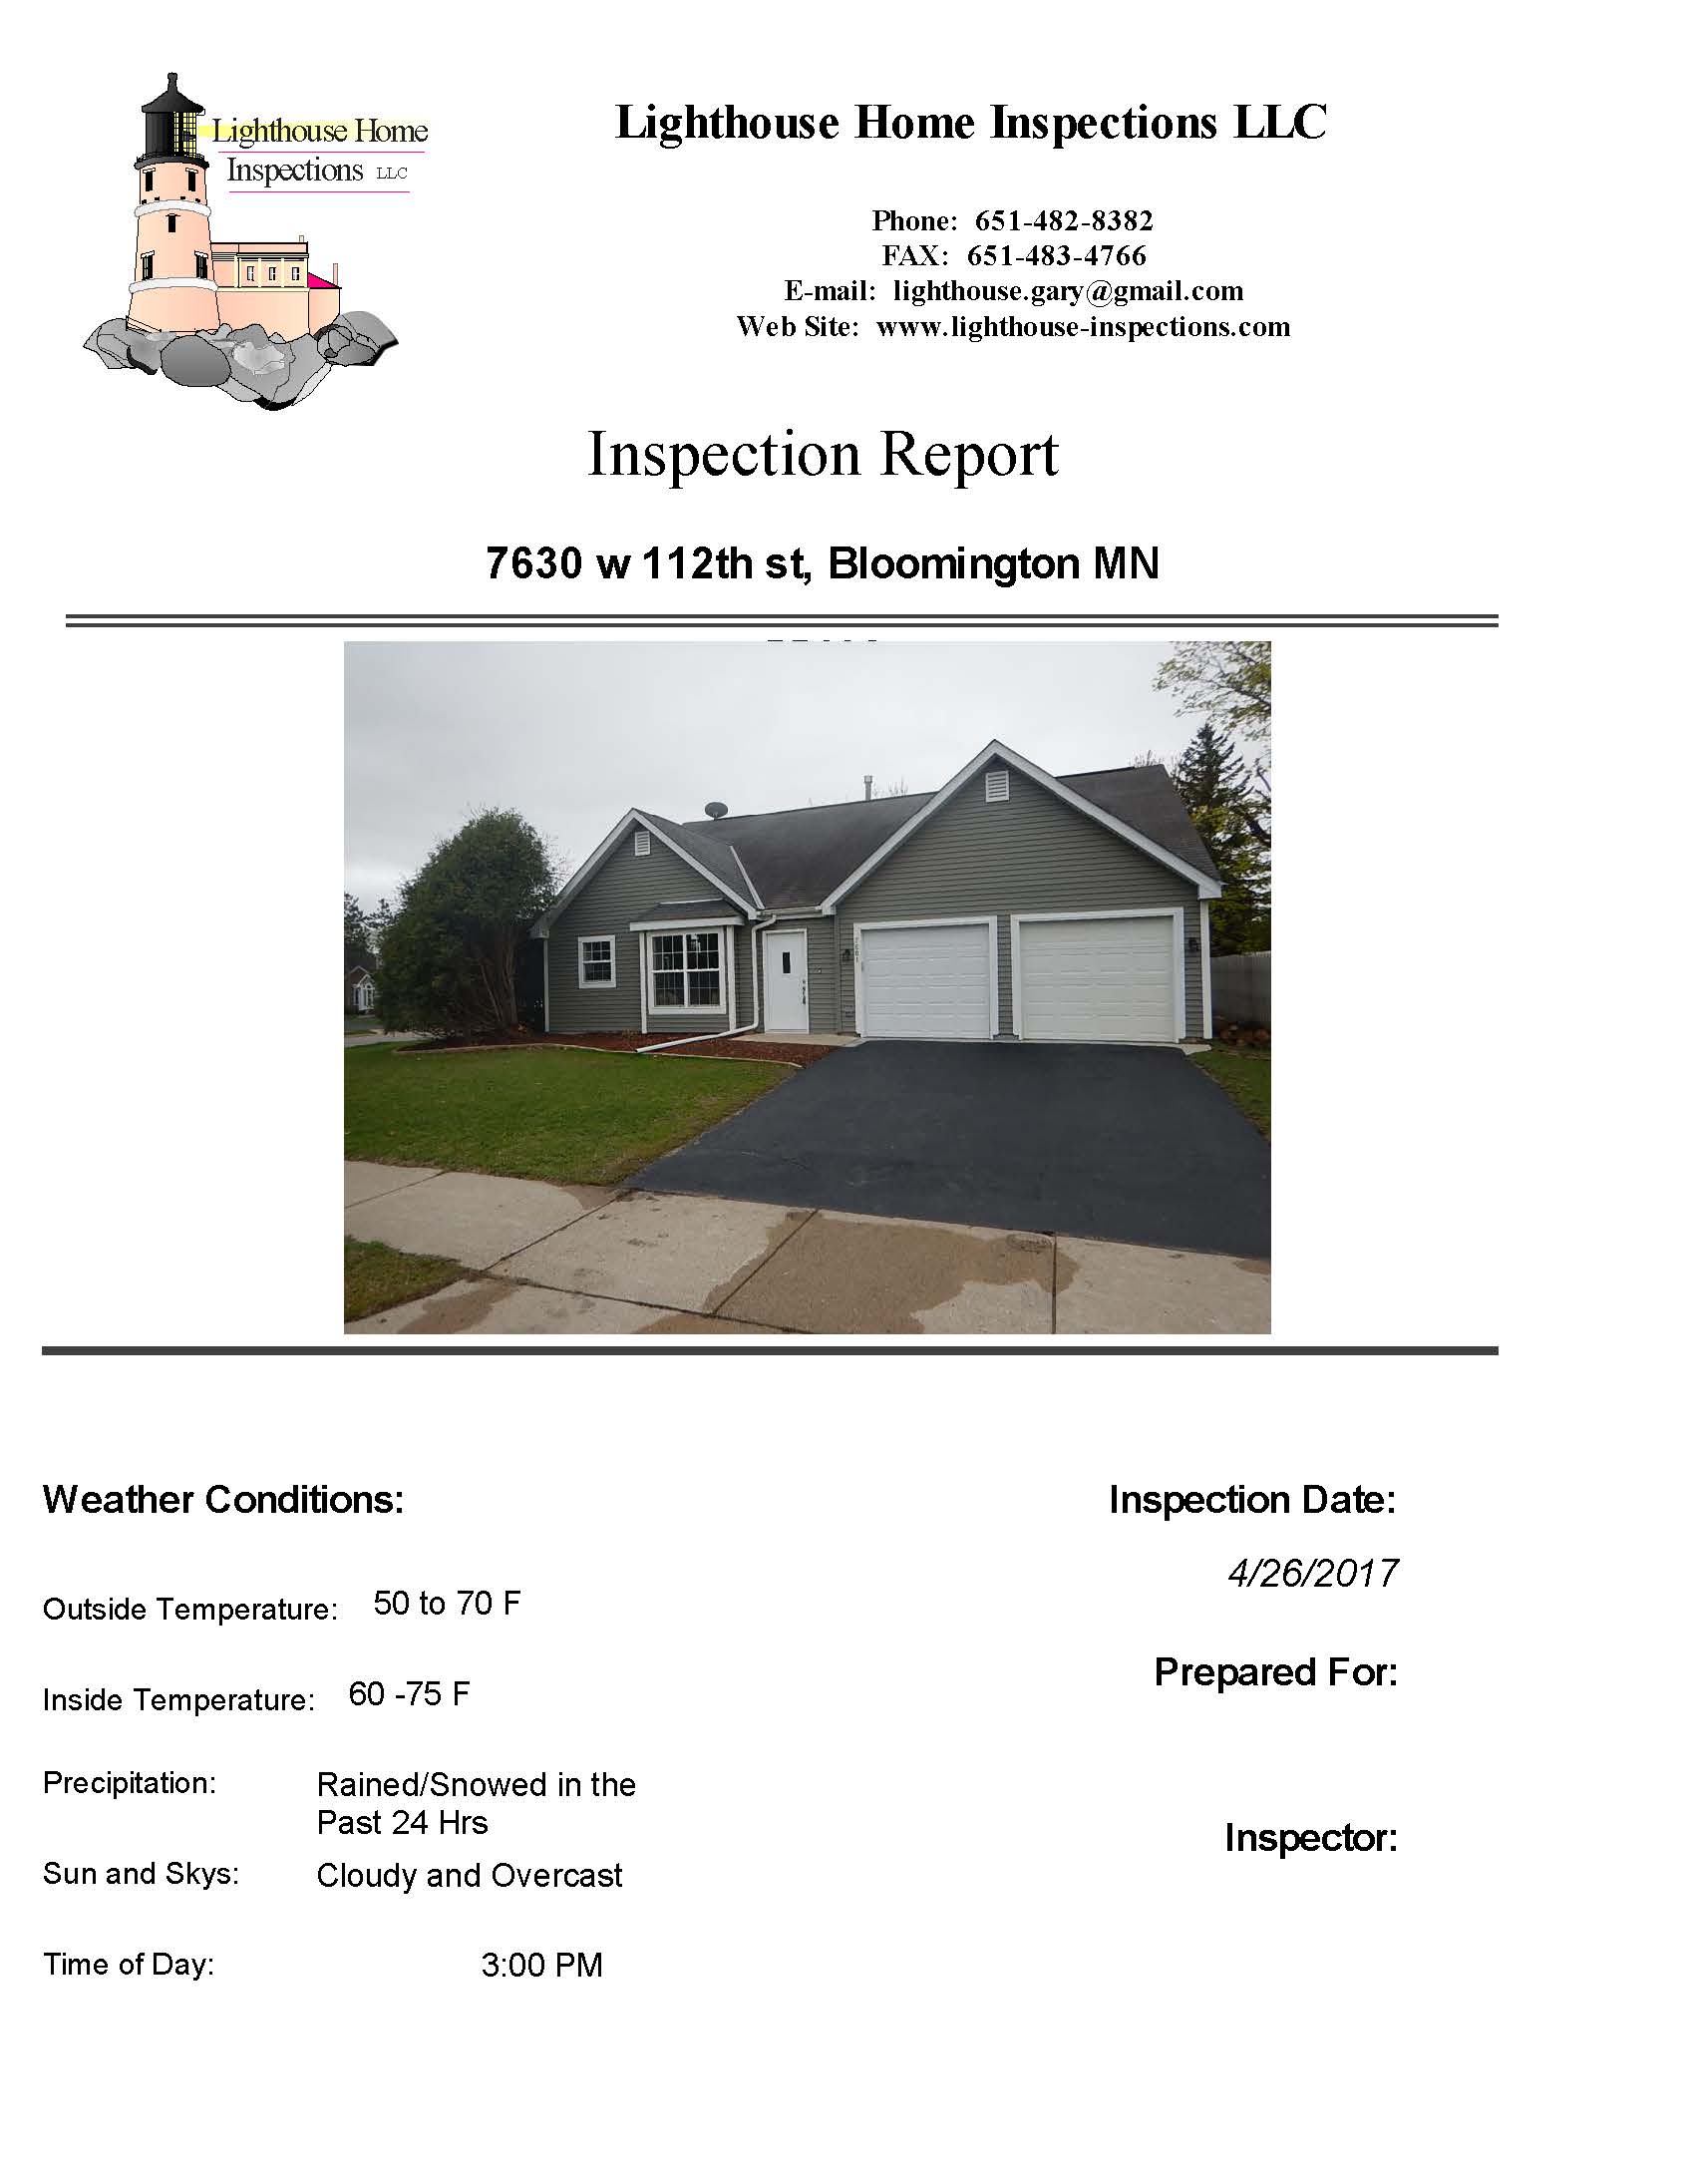 Single Family Example Report._Page_01.jpg